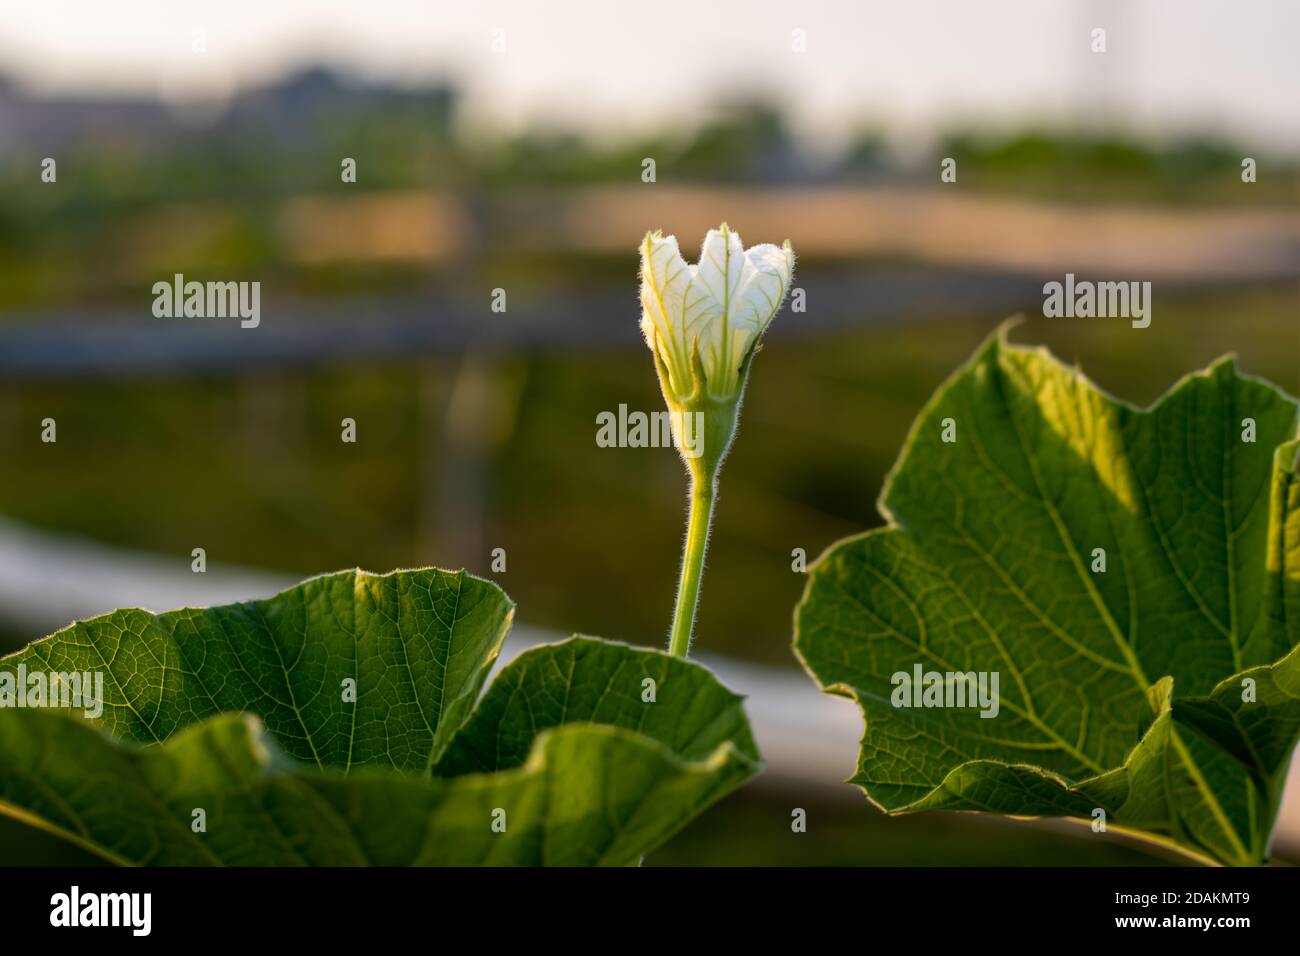 Bottle gourds vegetable white flower at the agriculture farm close up shot Stock Photo